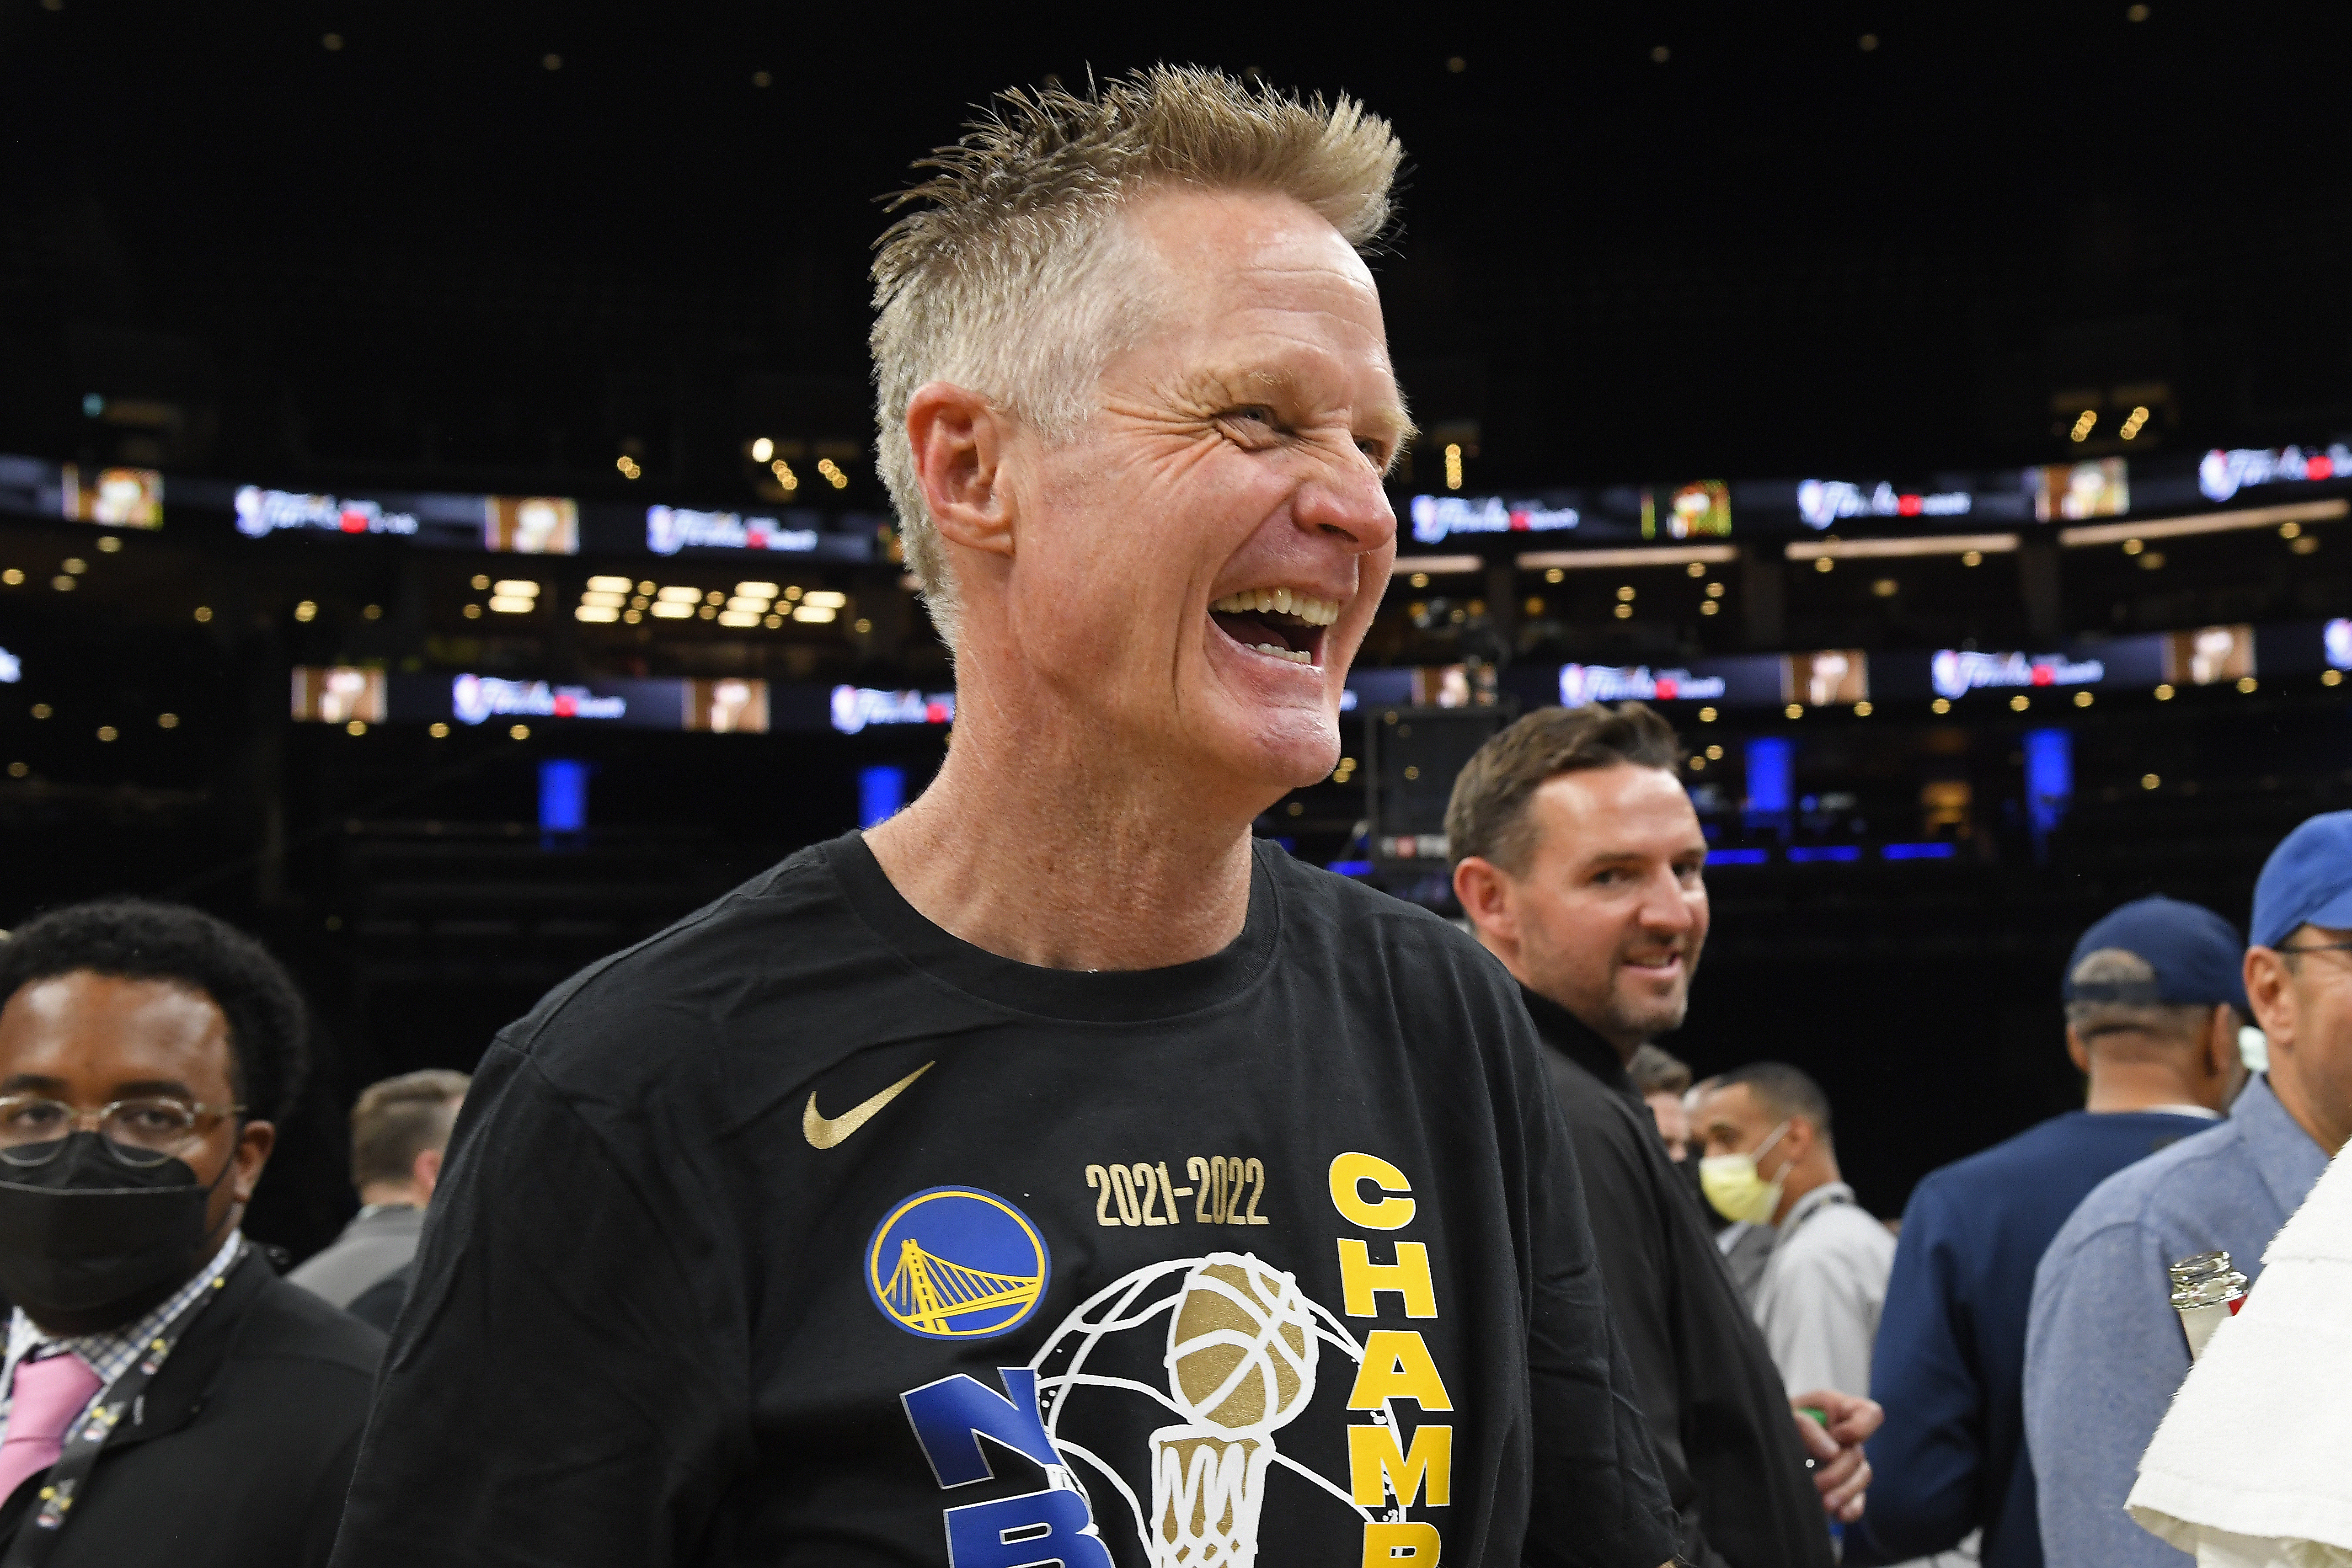 Steve Kerr smiling and celebrating after the 2022 championship.